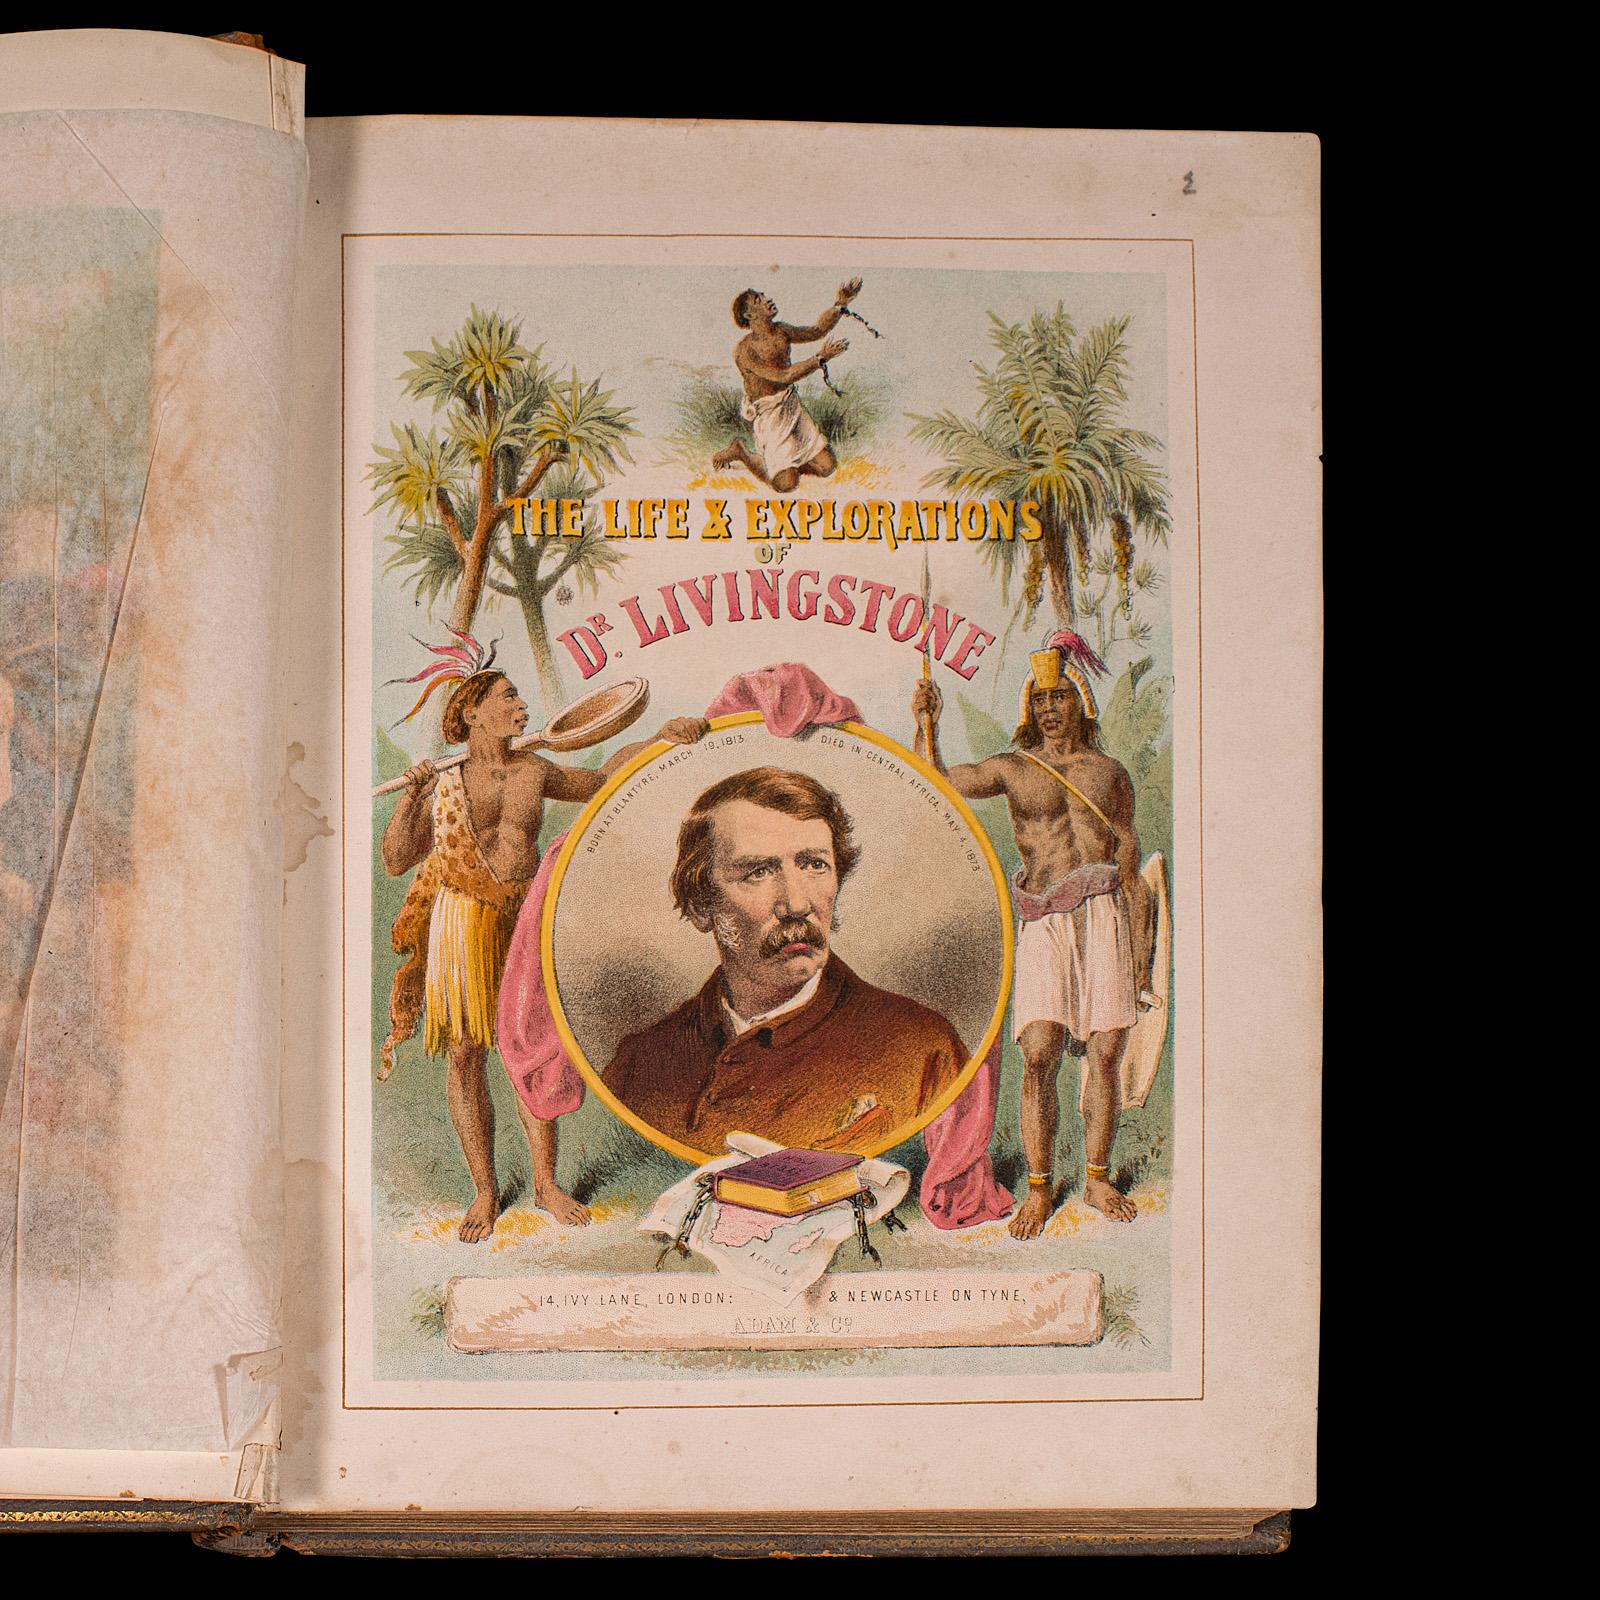 Antique Life & Explorations of Dr Livingstone Book, African Travel, Victorian In Good Condition For Sale In Hele, Devon, GB